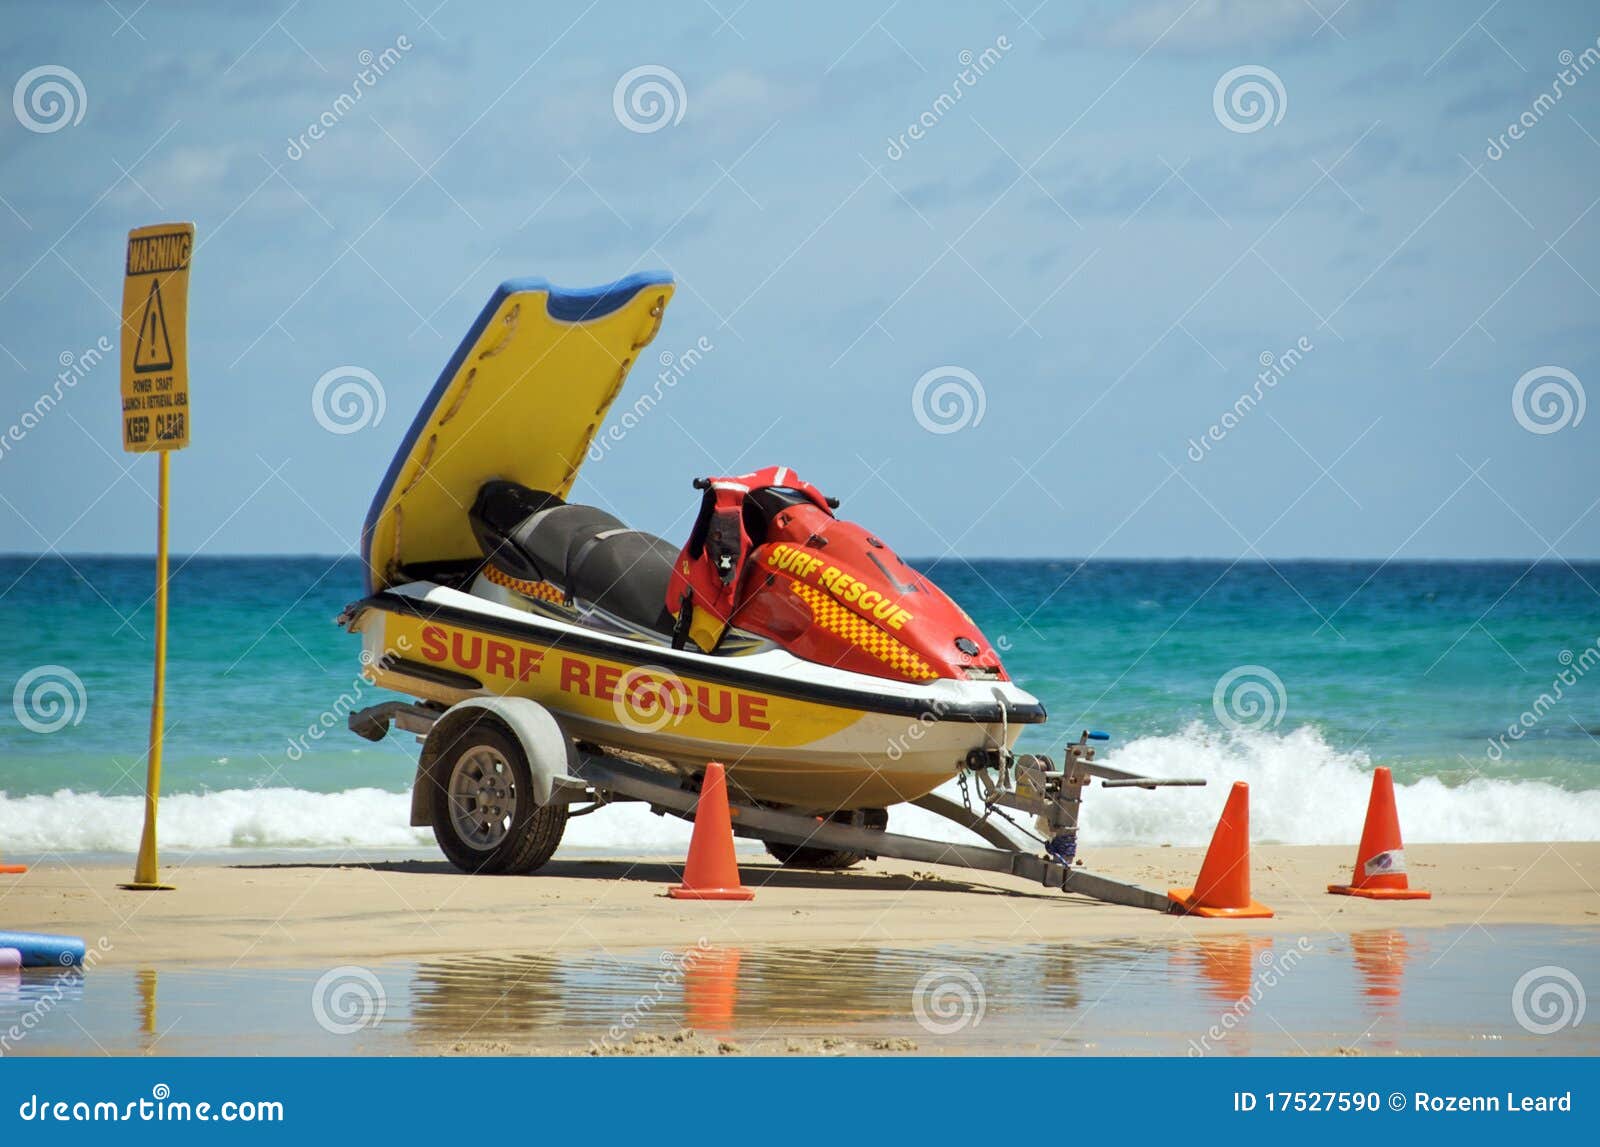 Surf Rescue Boat Stock Photo - Image: 17527590